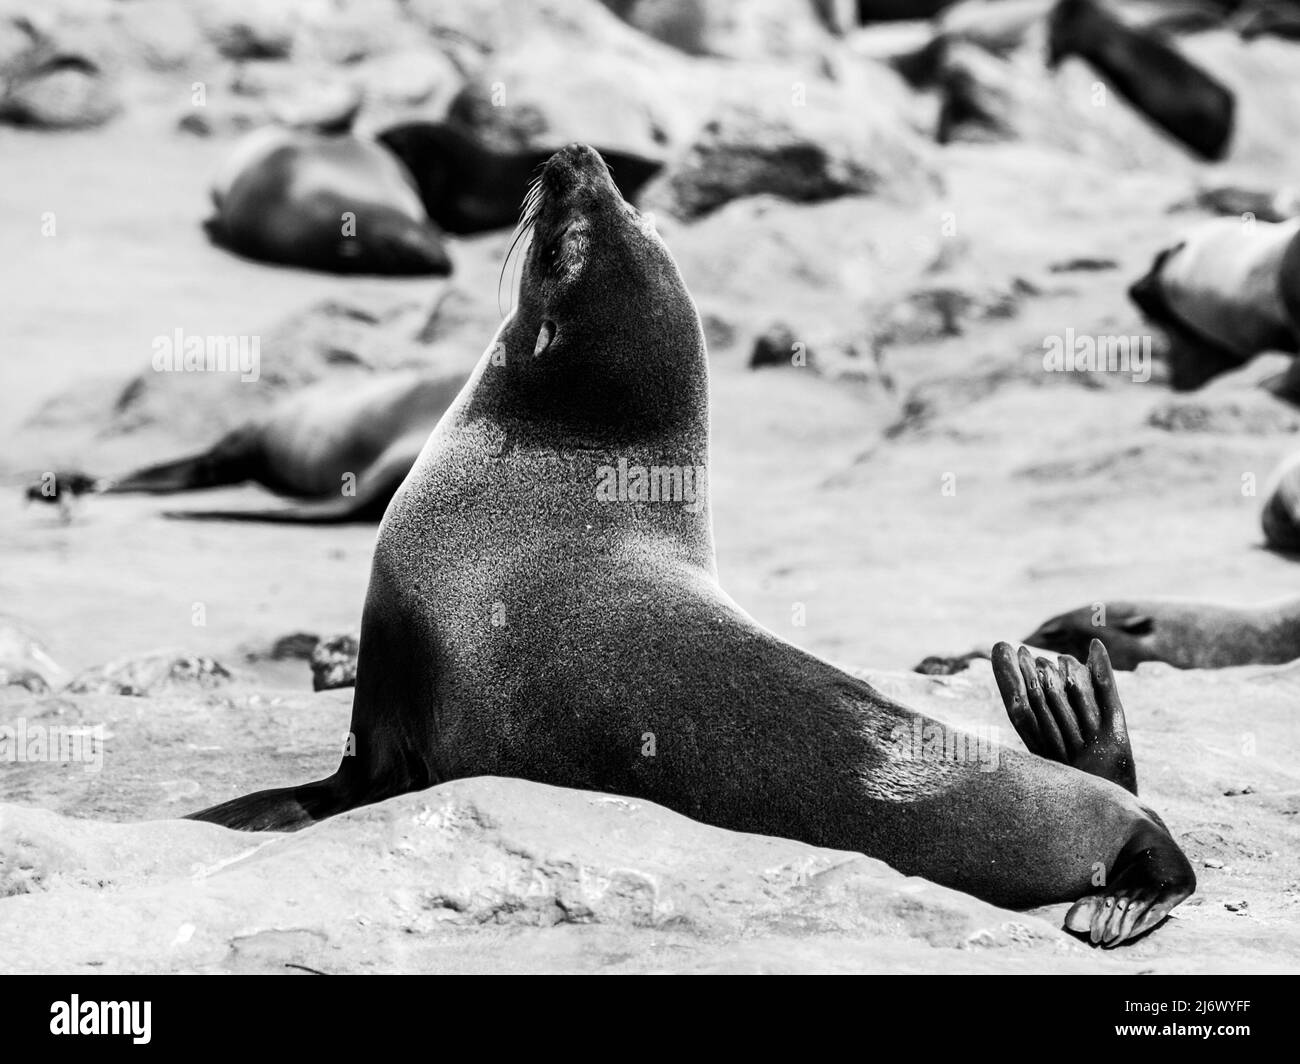 Close-up view of brown fur seal Stock Photo